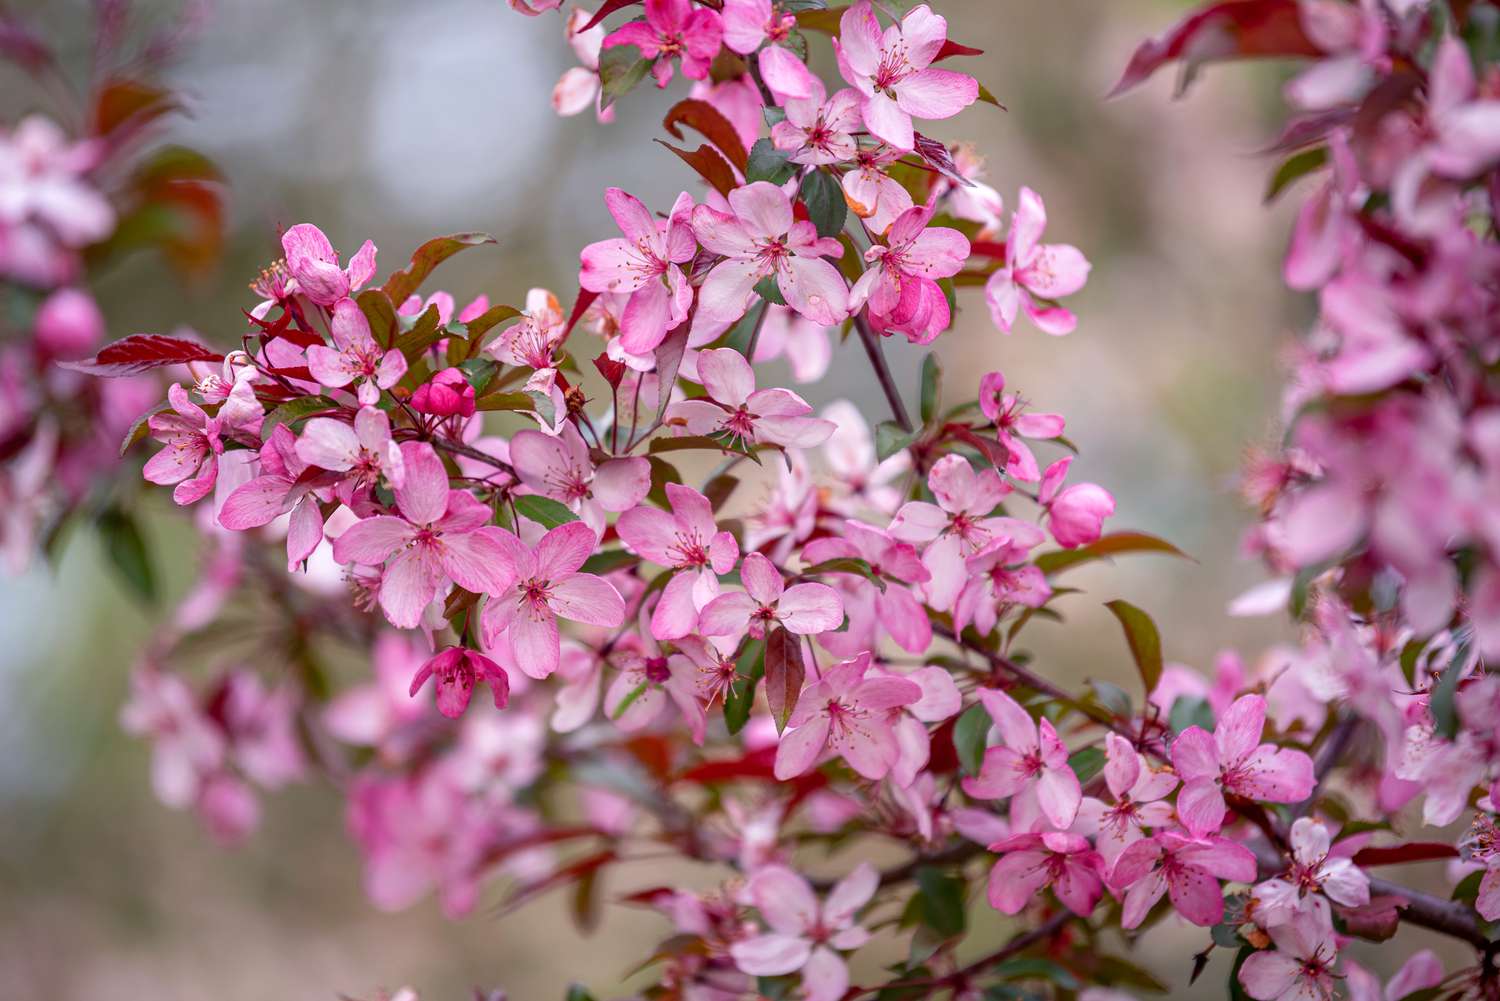 Crabapple tree branch with bright pink flower blossoms for hummingbirds